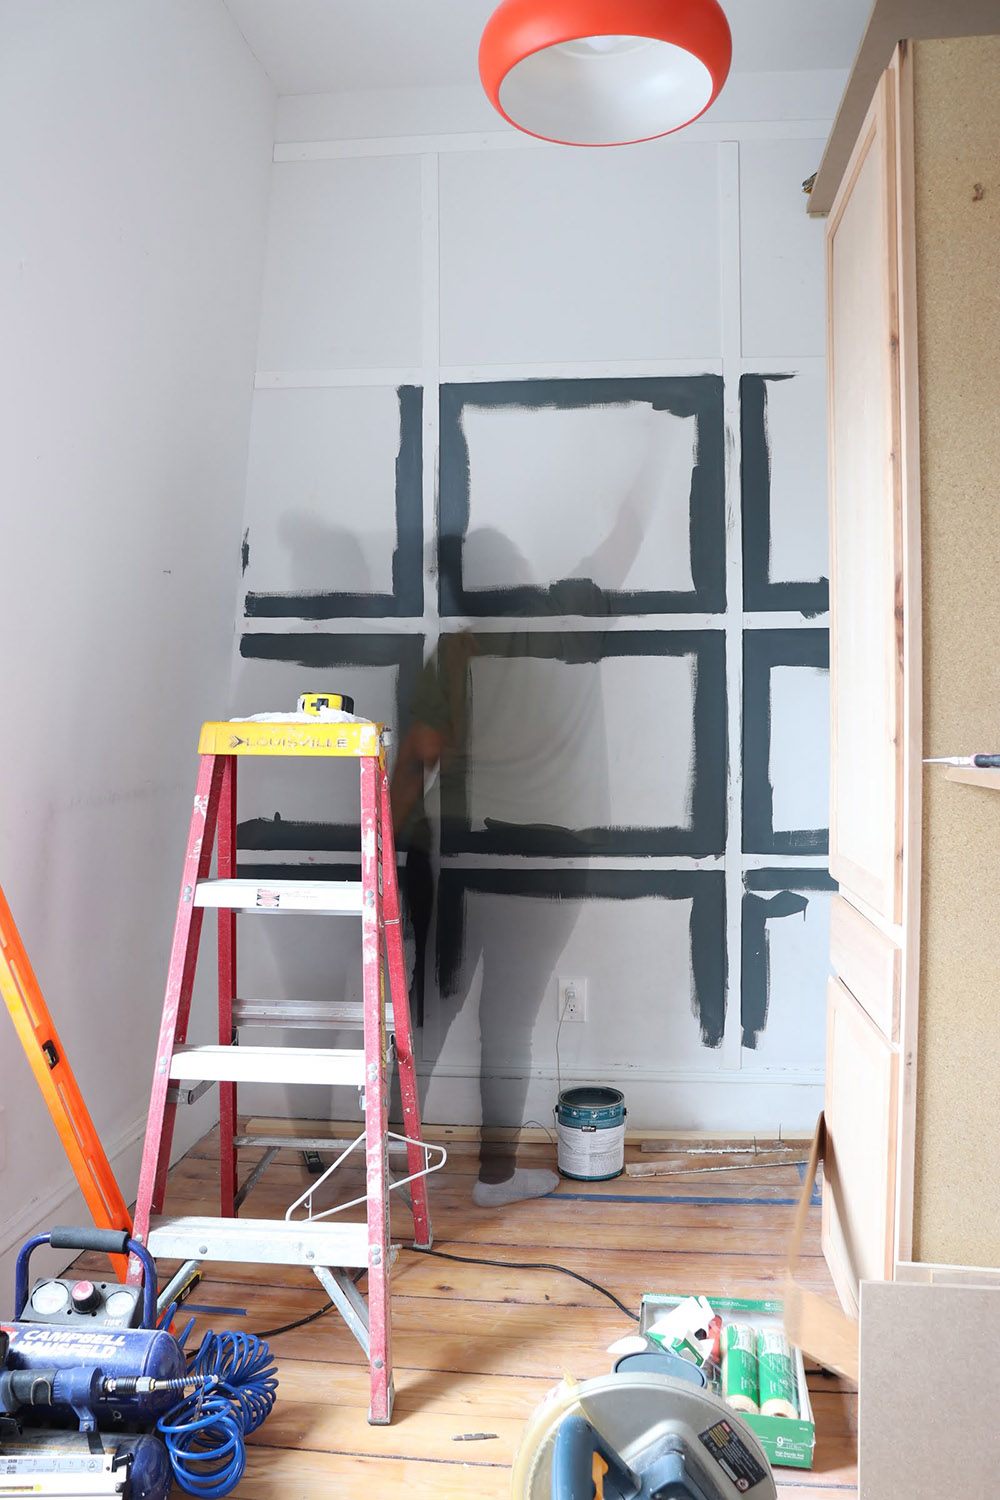 A grid wall being pained using paint and a ladder